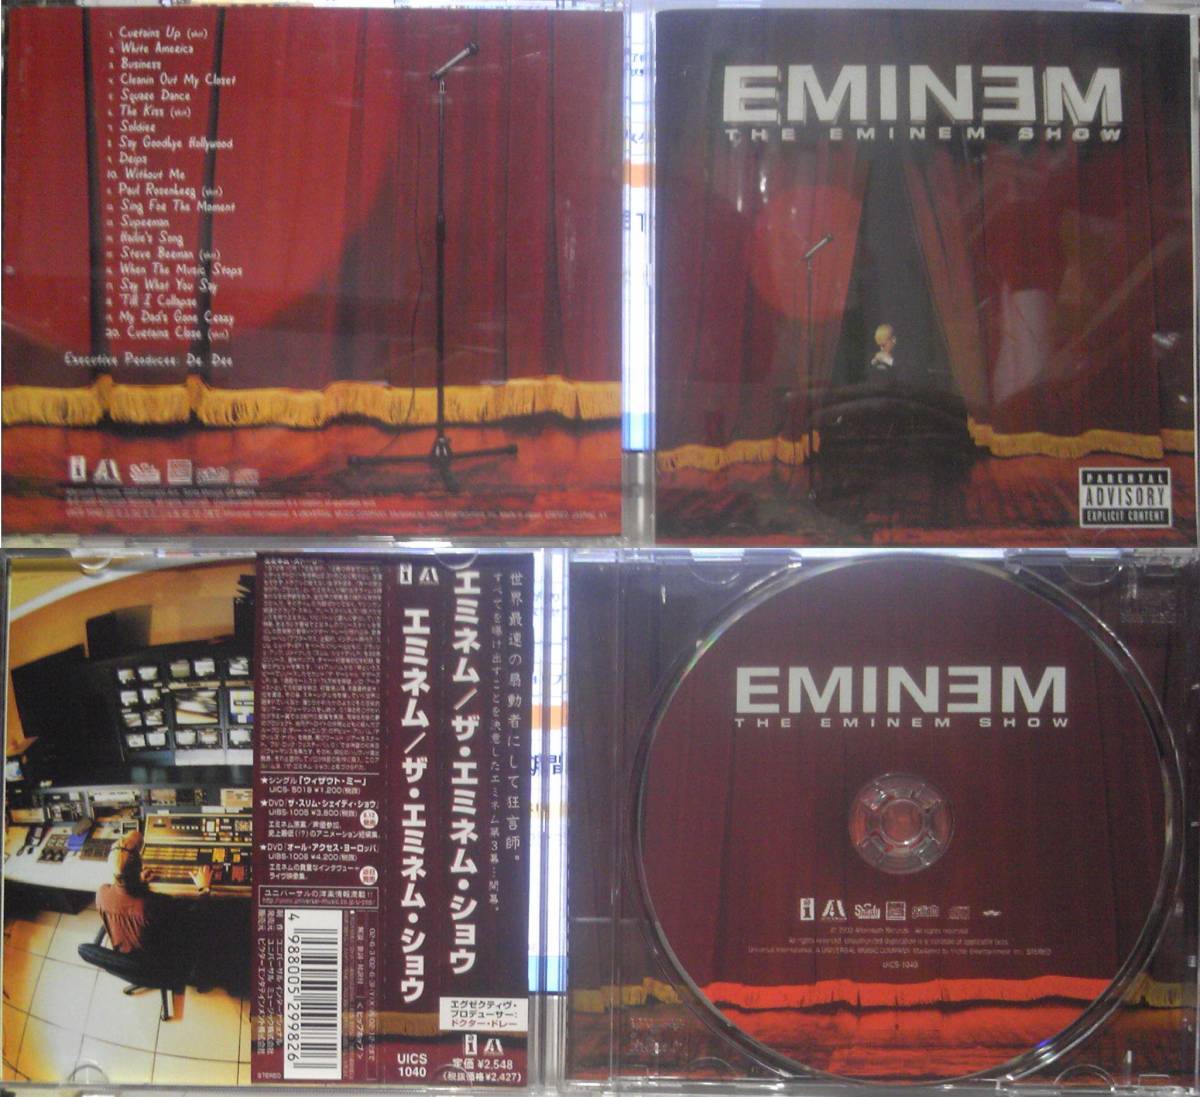 CD5枚 THE EMINEM SHOW, PHARRELL IN MY MIND, Diggy Simmons Unexpected Arrival Freedom Williams, T.I. TROUBLE MAN HEAVY IS THE END_画像1